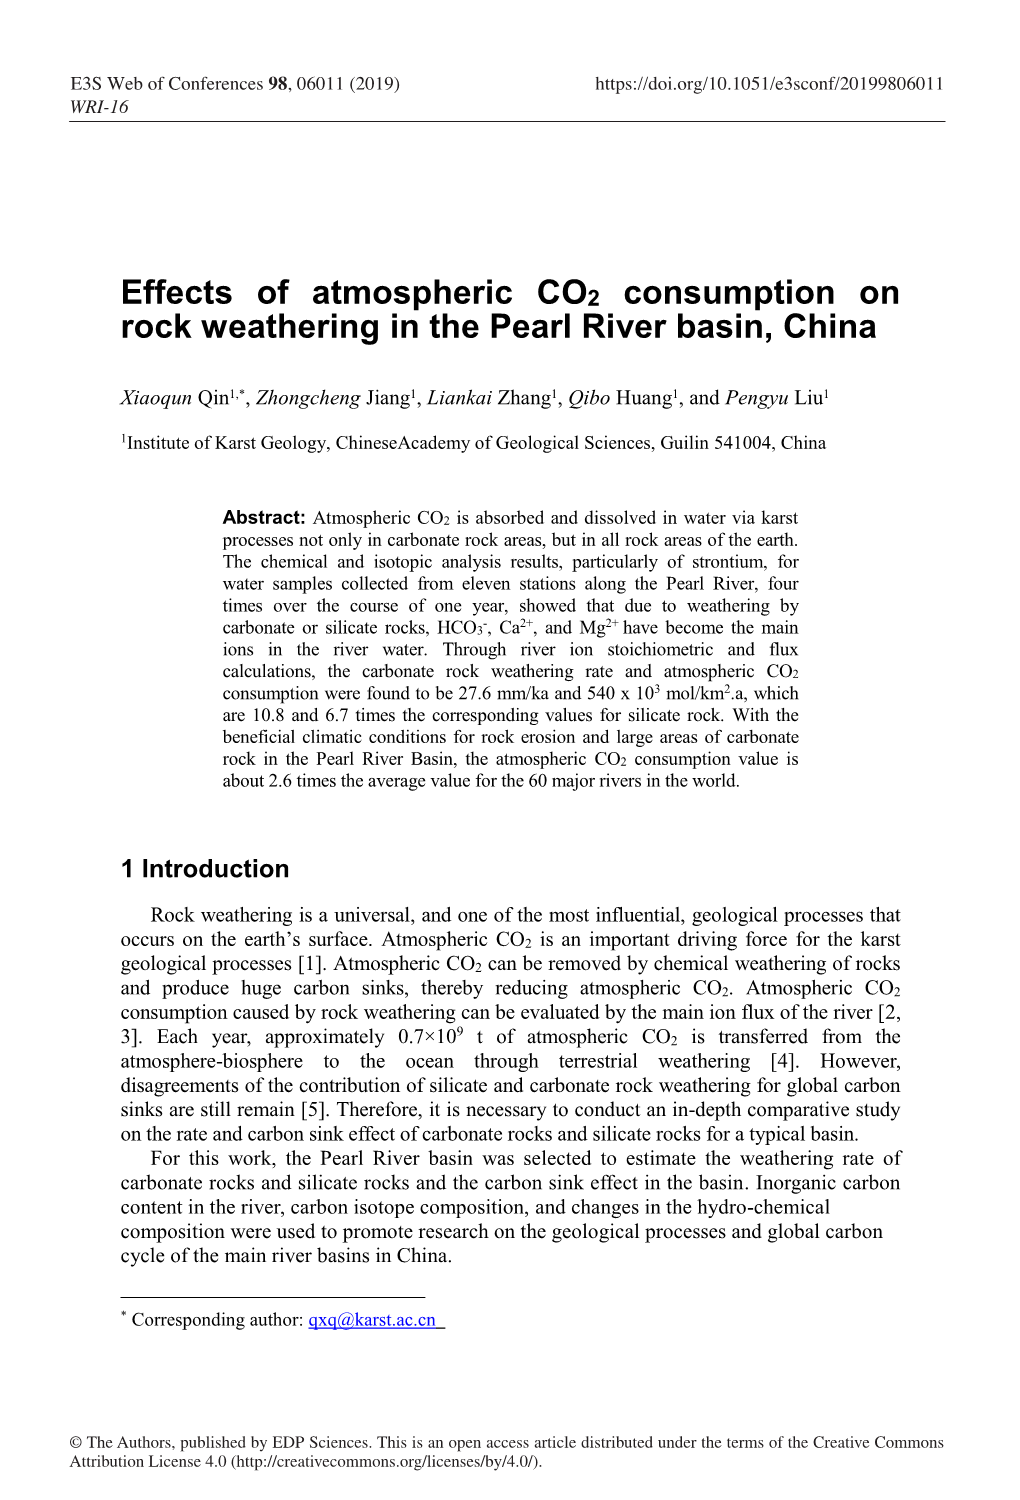 Effects of Atmospheric CO2 Consumption on Rock Weathering in the Pearl River Basin, China